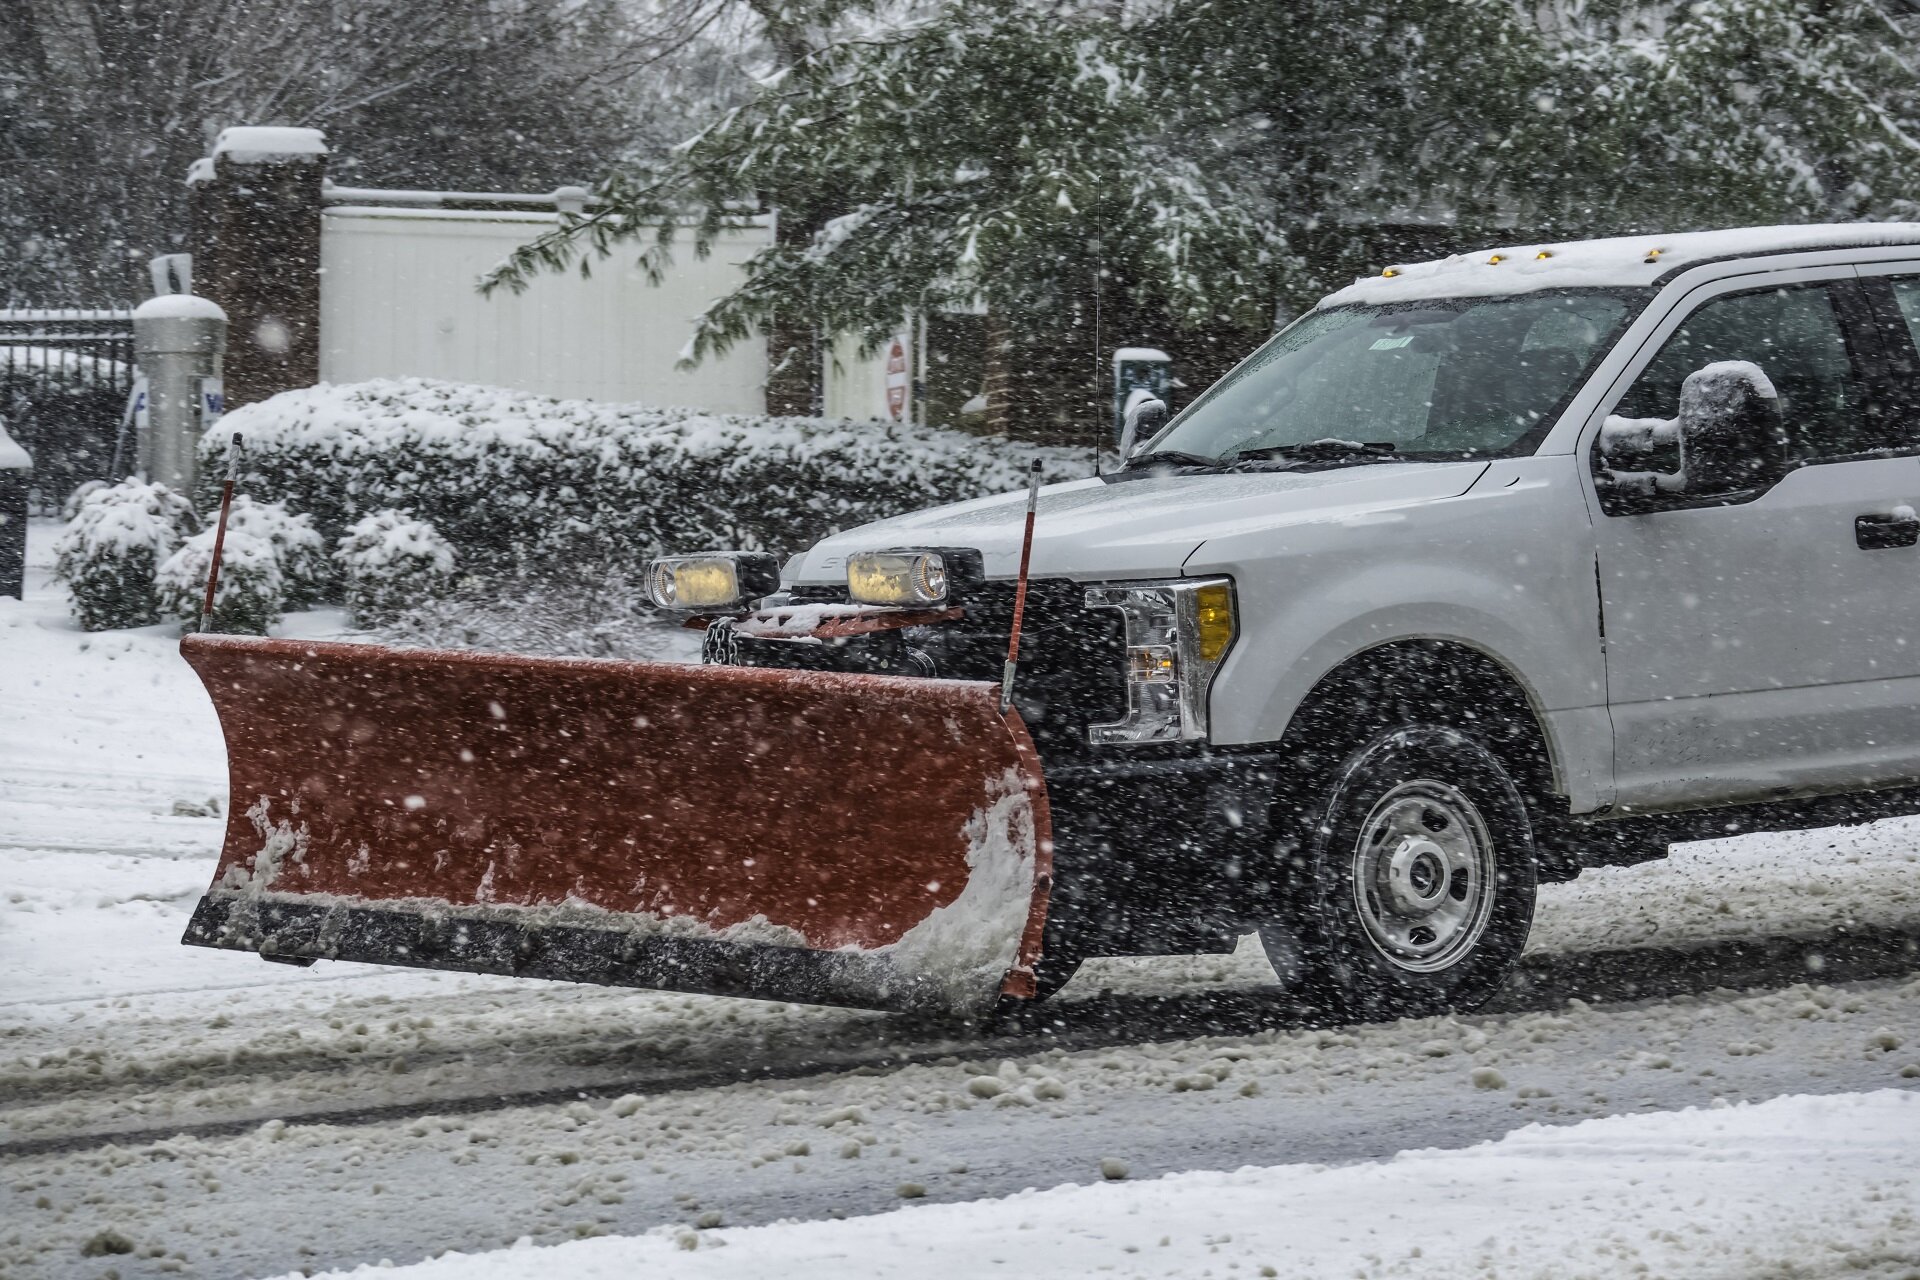   Residential   SNOW PLOWING + ICE MANAGEMENT  